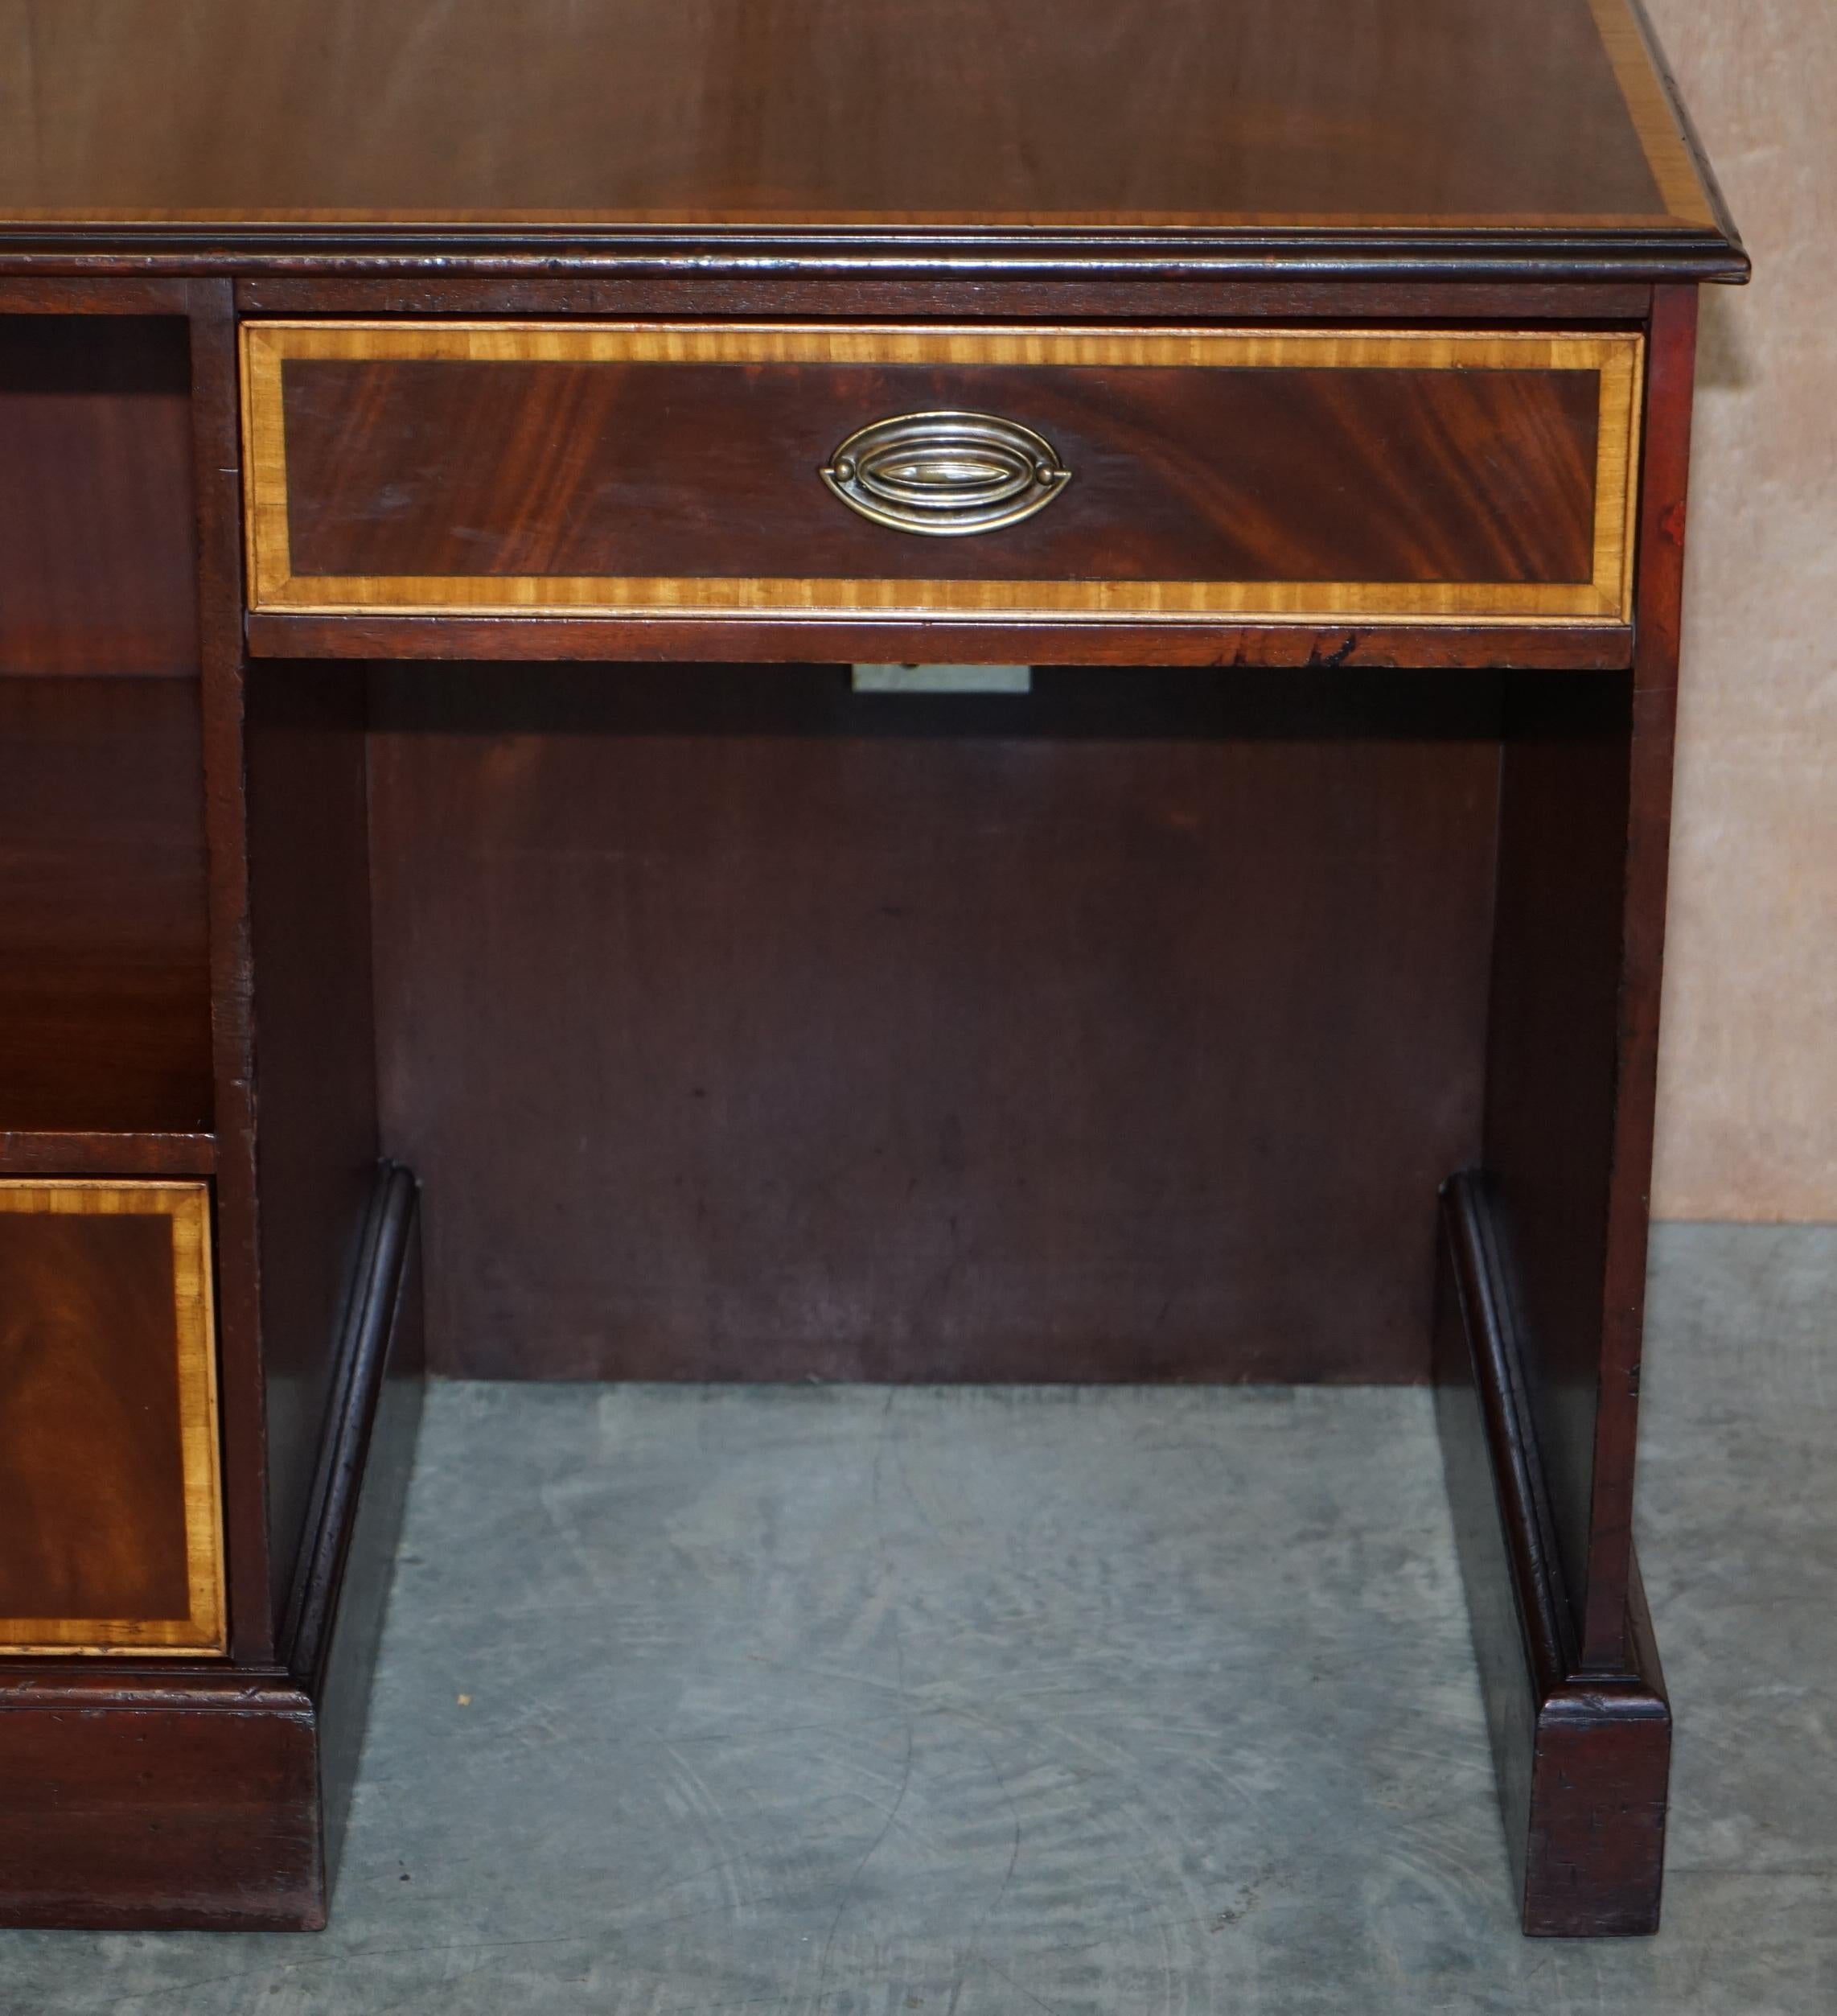 Hand-Crafted Lovely William L Maclean Flamed Hardwood & Walnut Knee Hole Work Office Desk